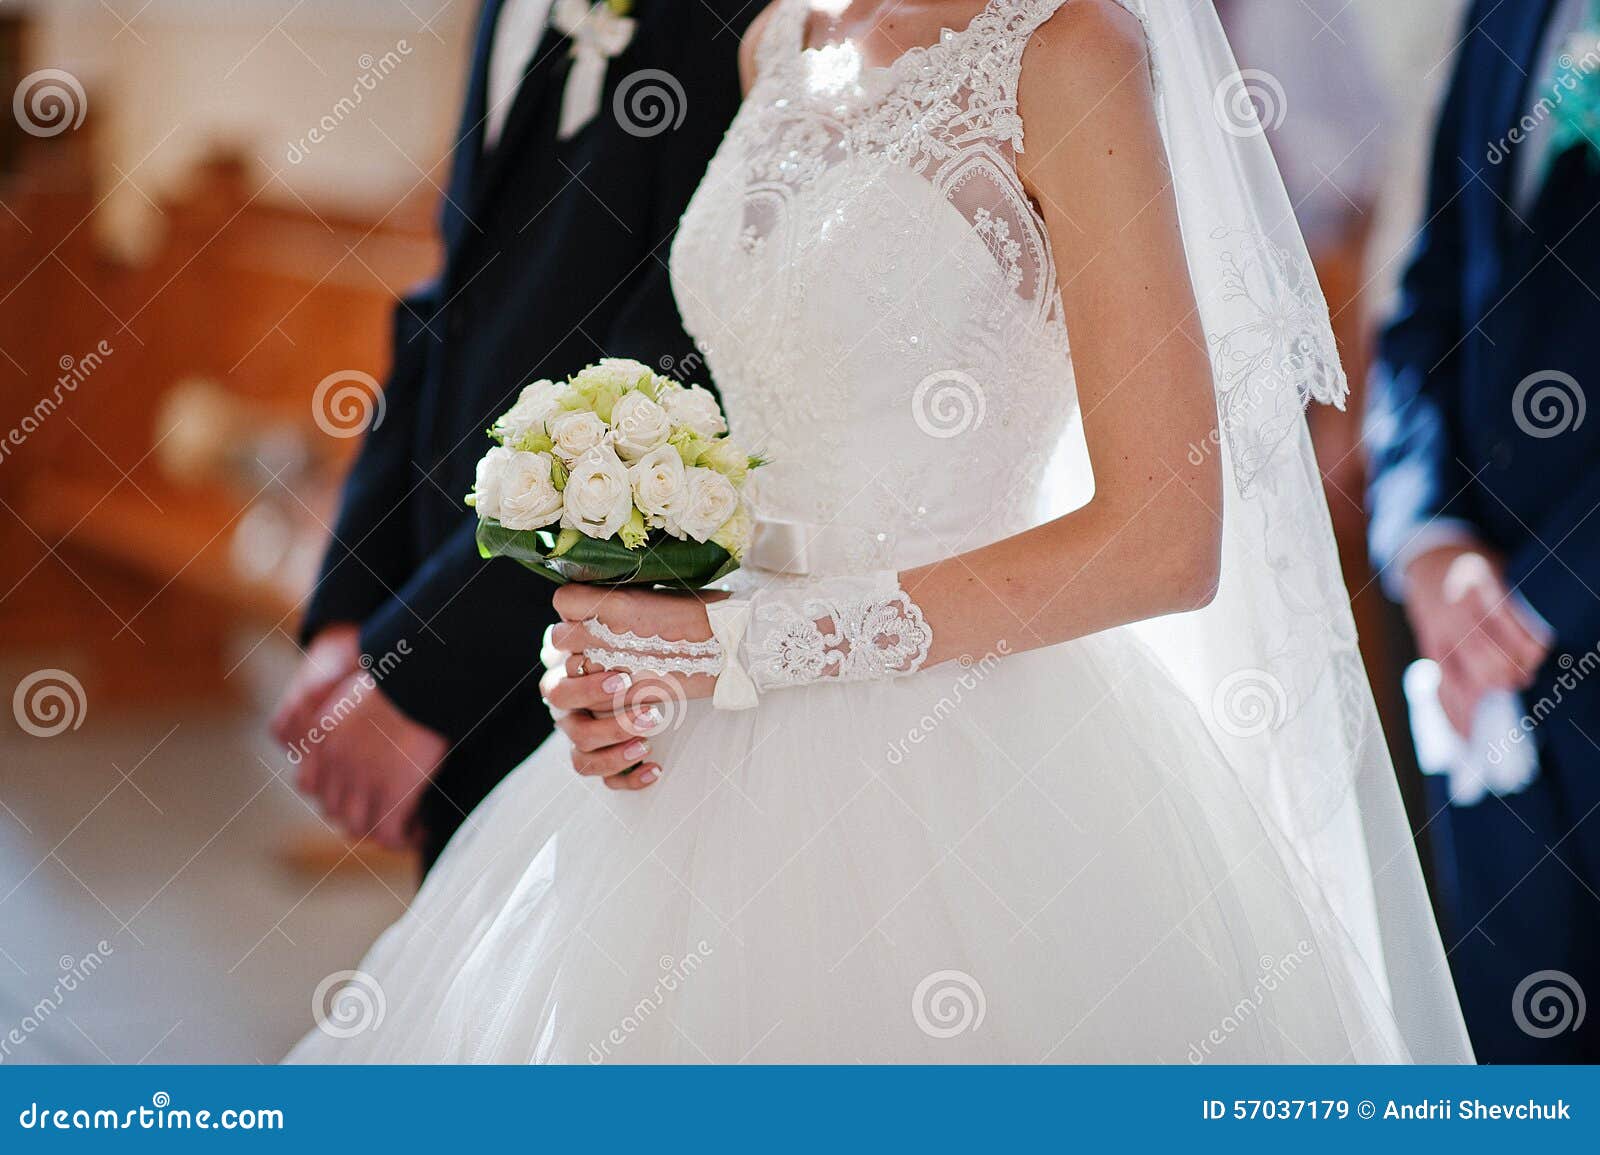 Holding Hands of Wedding Couple Stock Image - Image of trees, hands ...